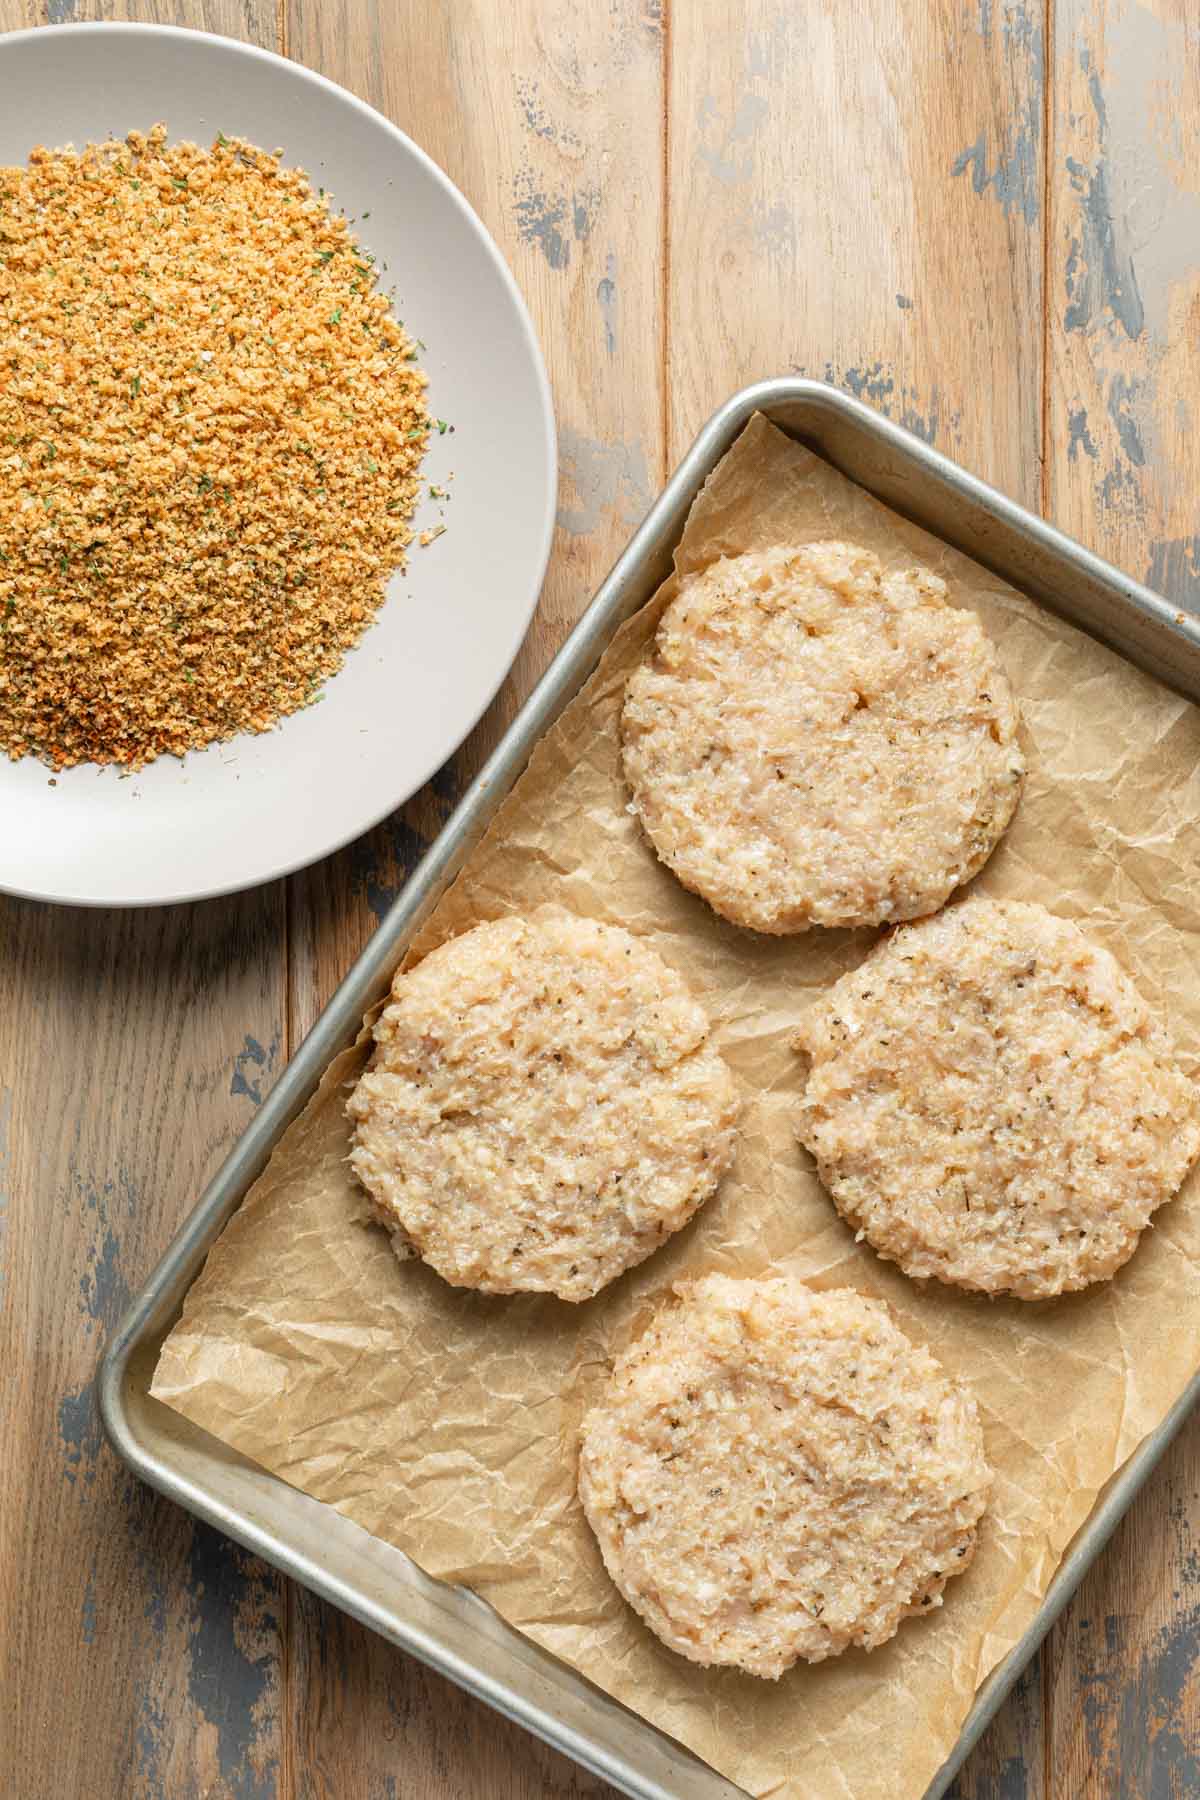 Chicken patties arranged on parchment paper next to a bowl of seasoned breadcrumbs.